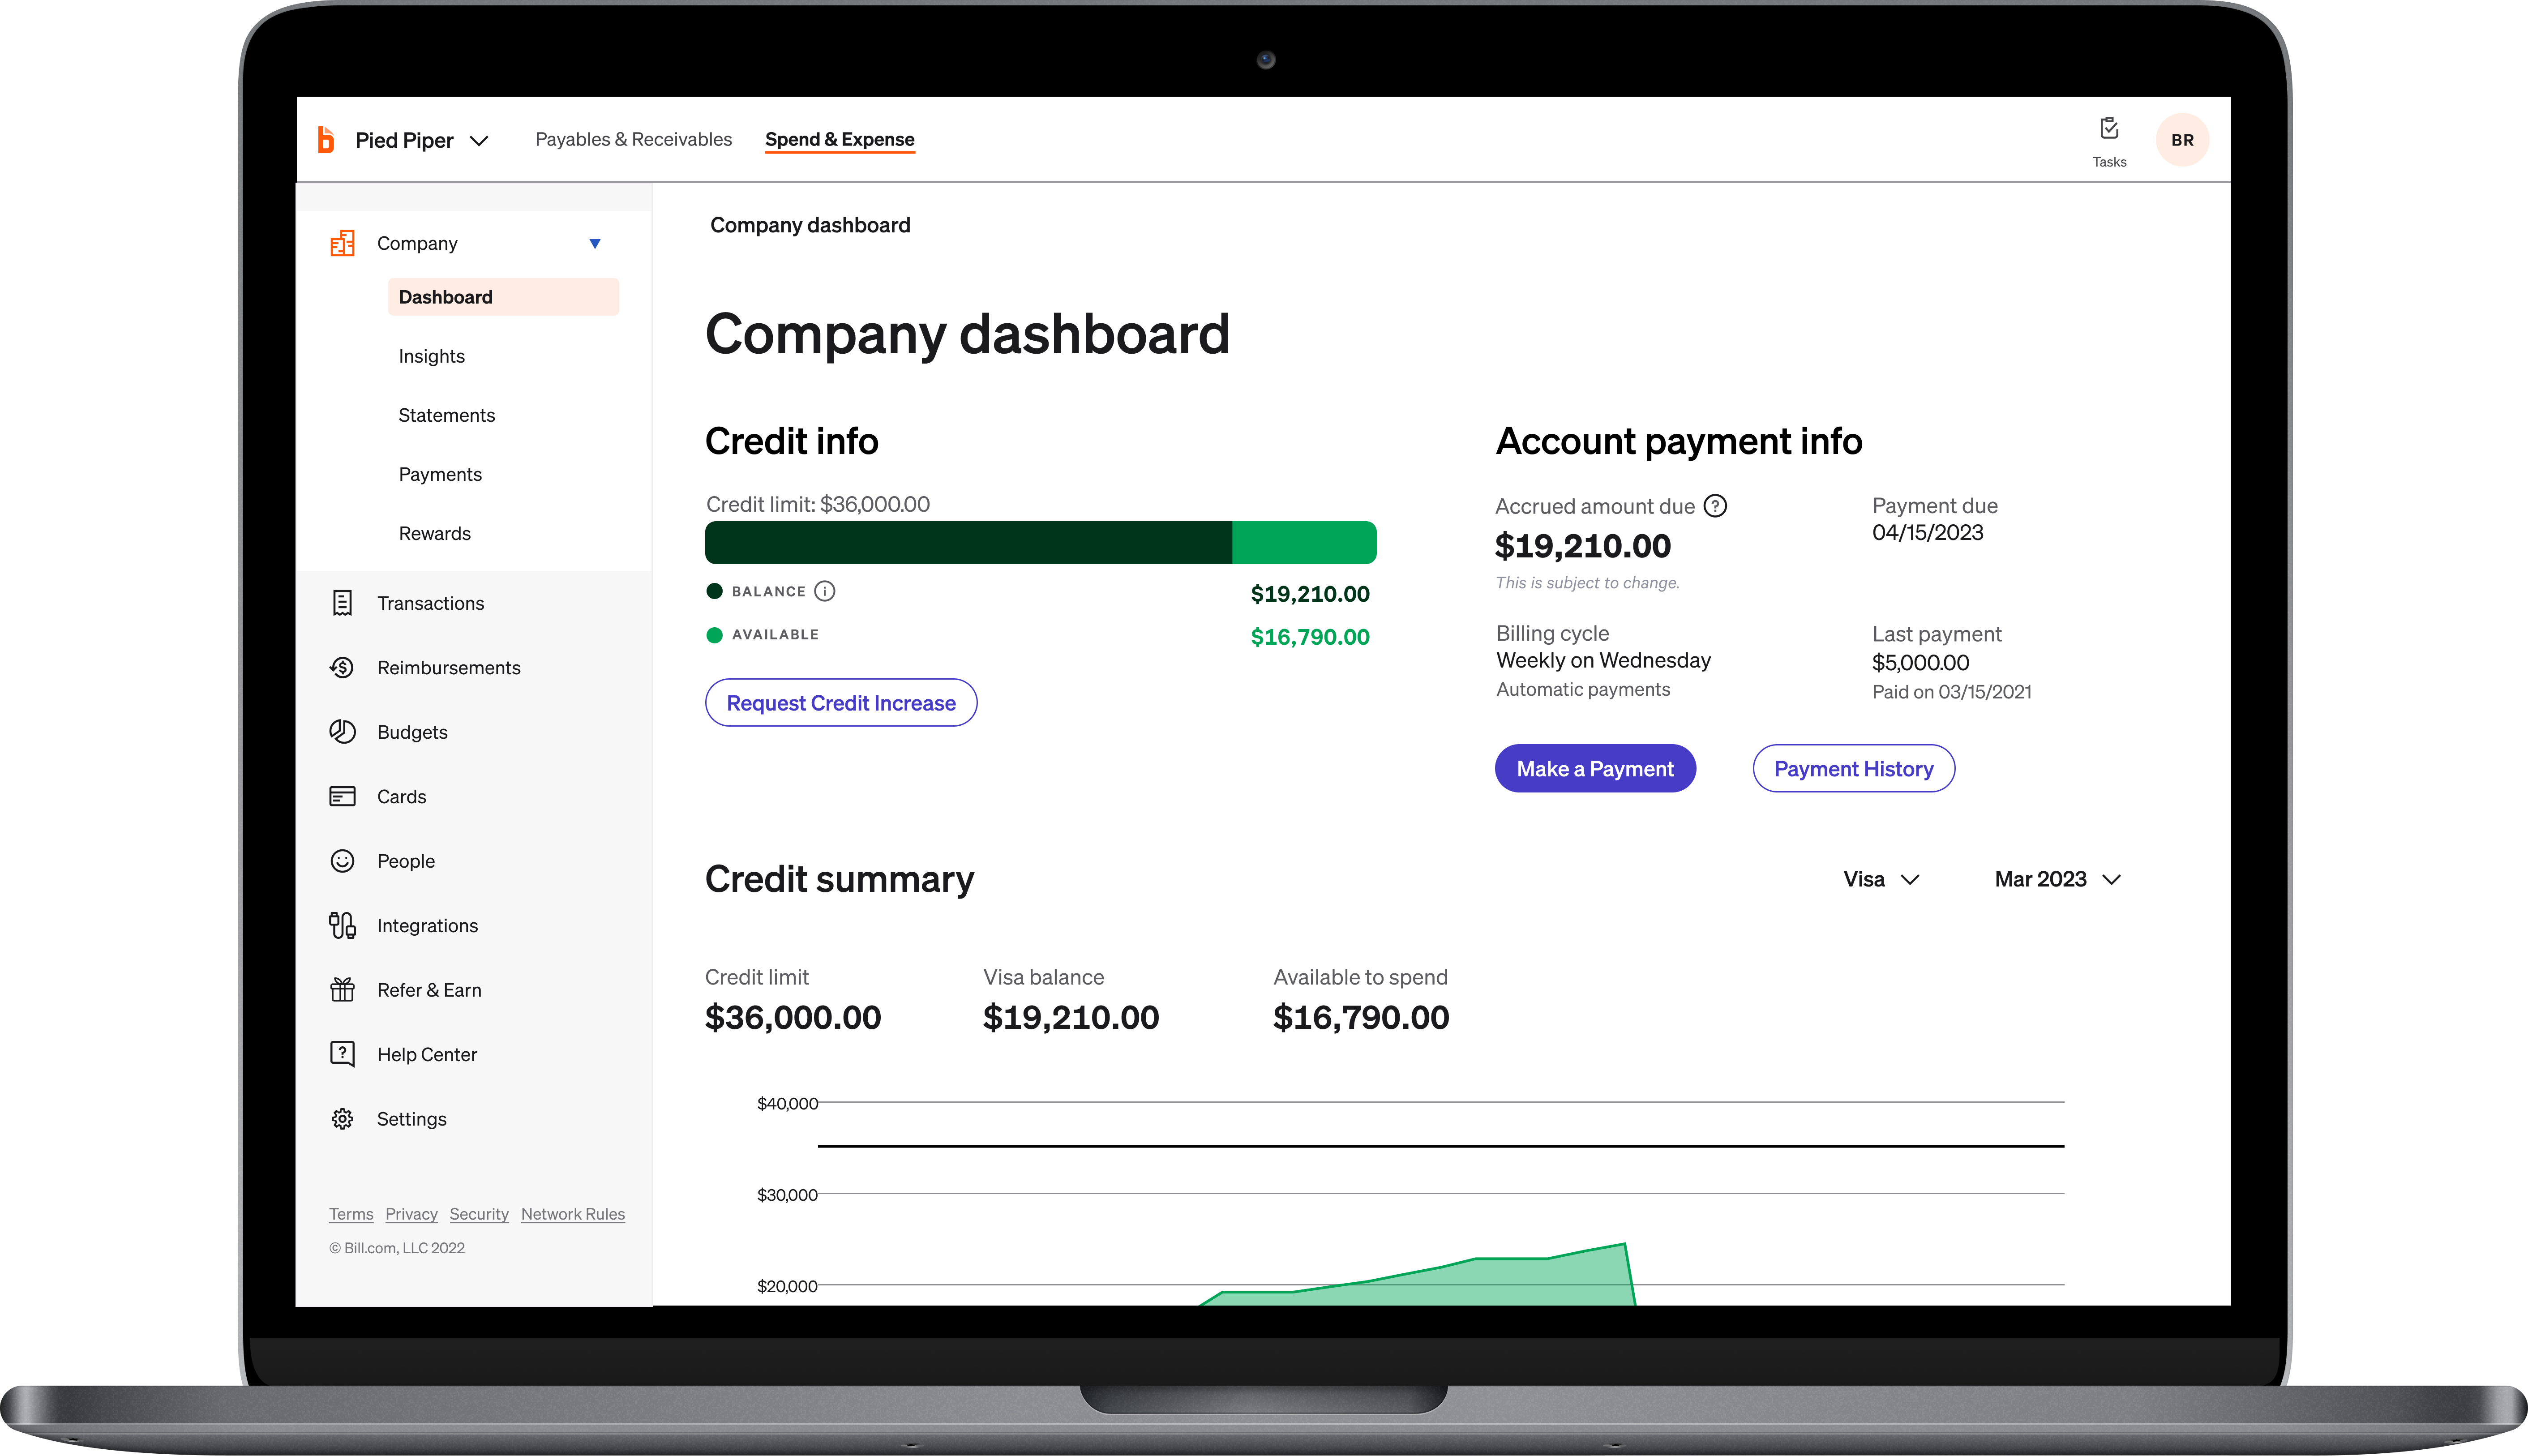 BILL Spend & Expense (Formerly Divvy) Software - Company Dashboard